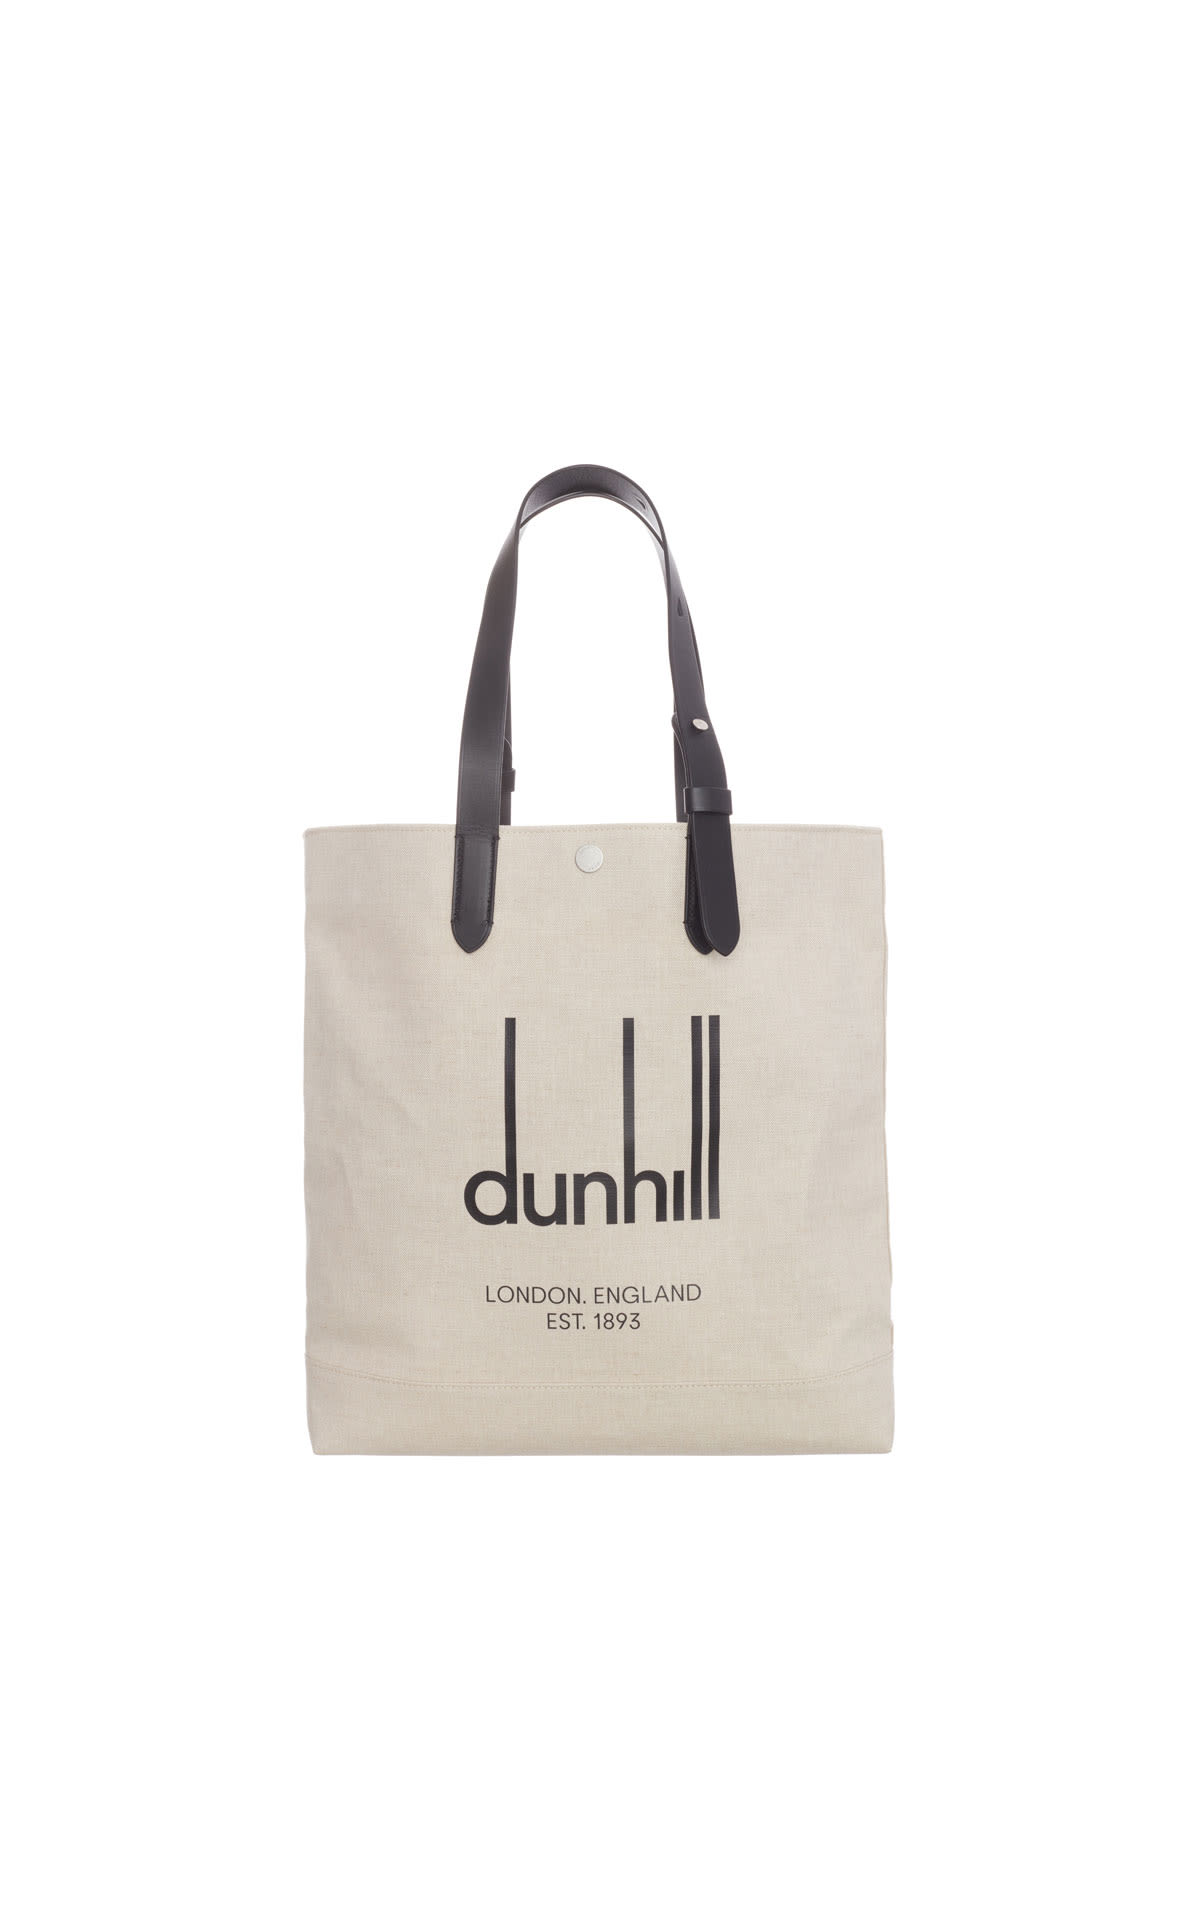 dunhill Legacy tote from Bicester Village